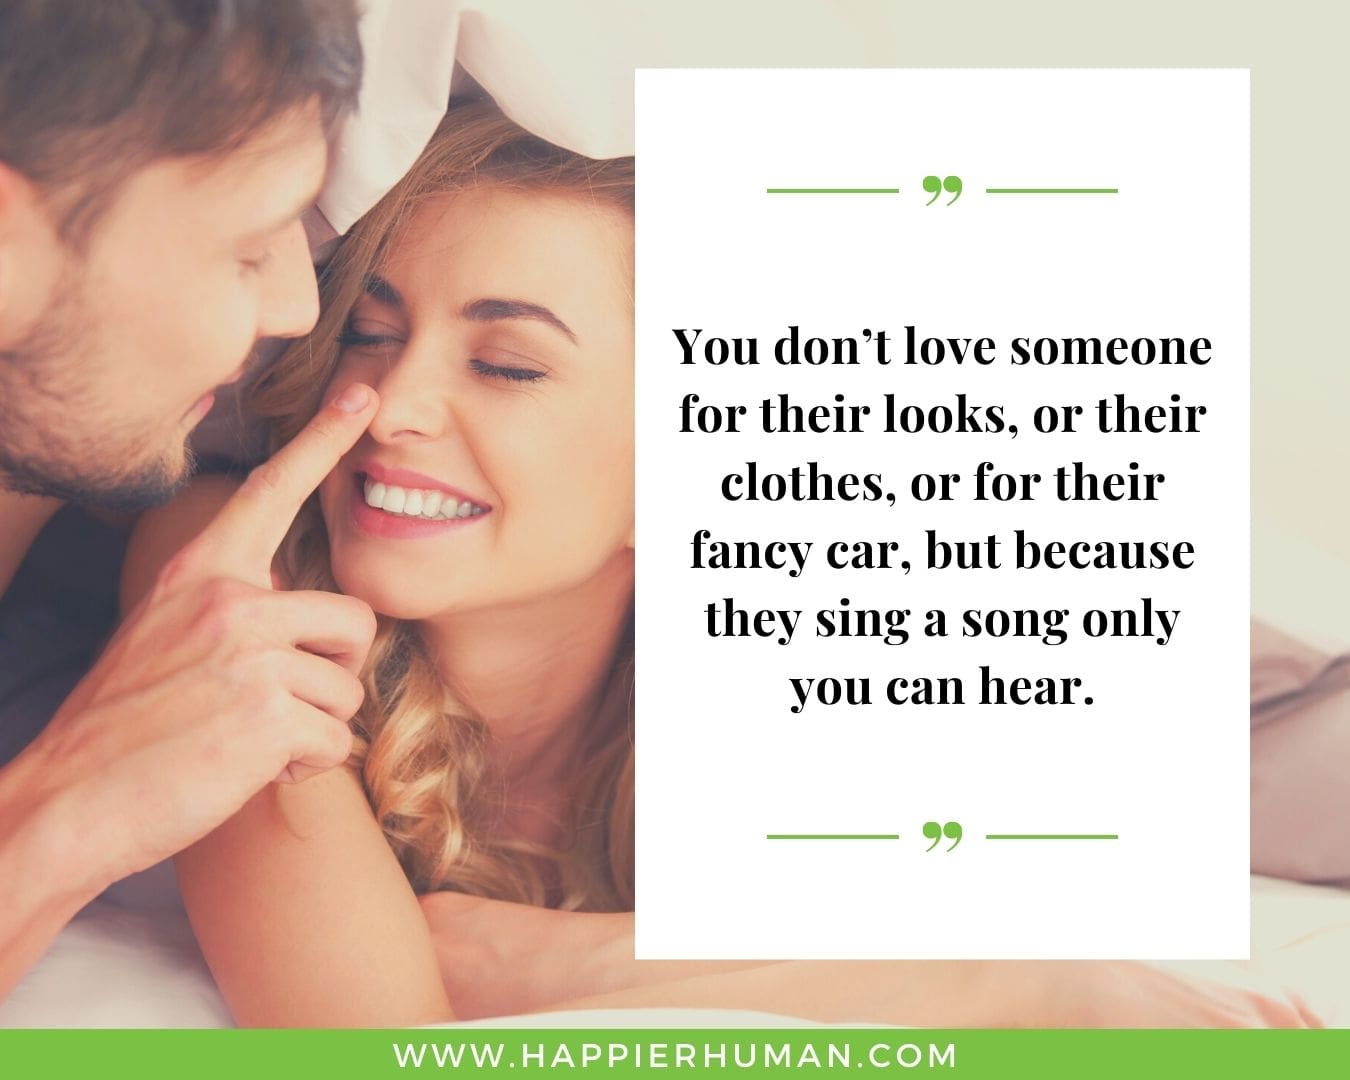 Unconditional Love Quotes for Her - “You don’t love someone for their looks, or their clothes, or for their fancy car, but because they sing a song only you can hear.”